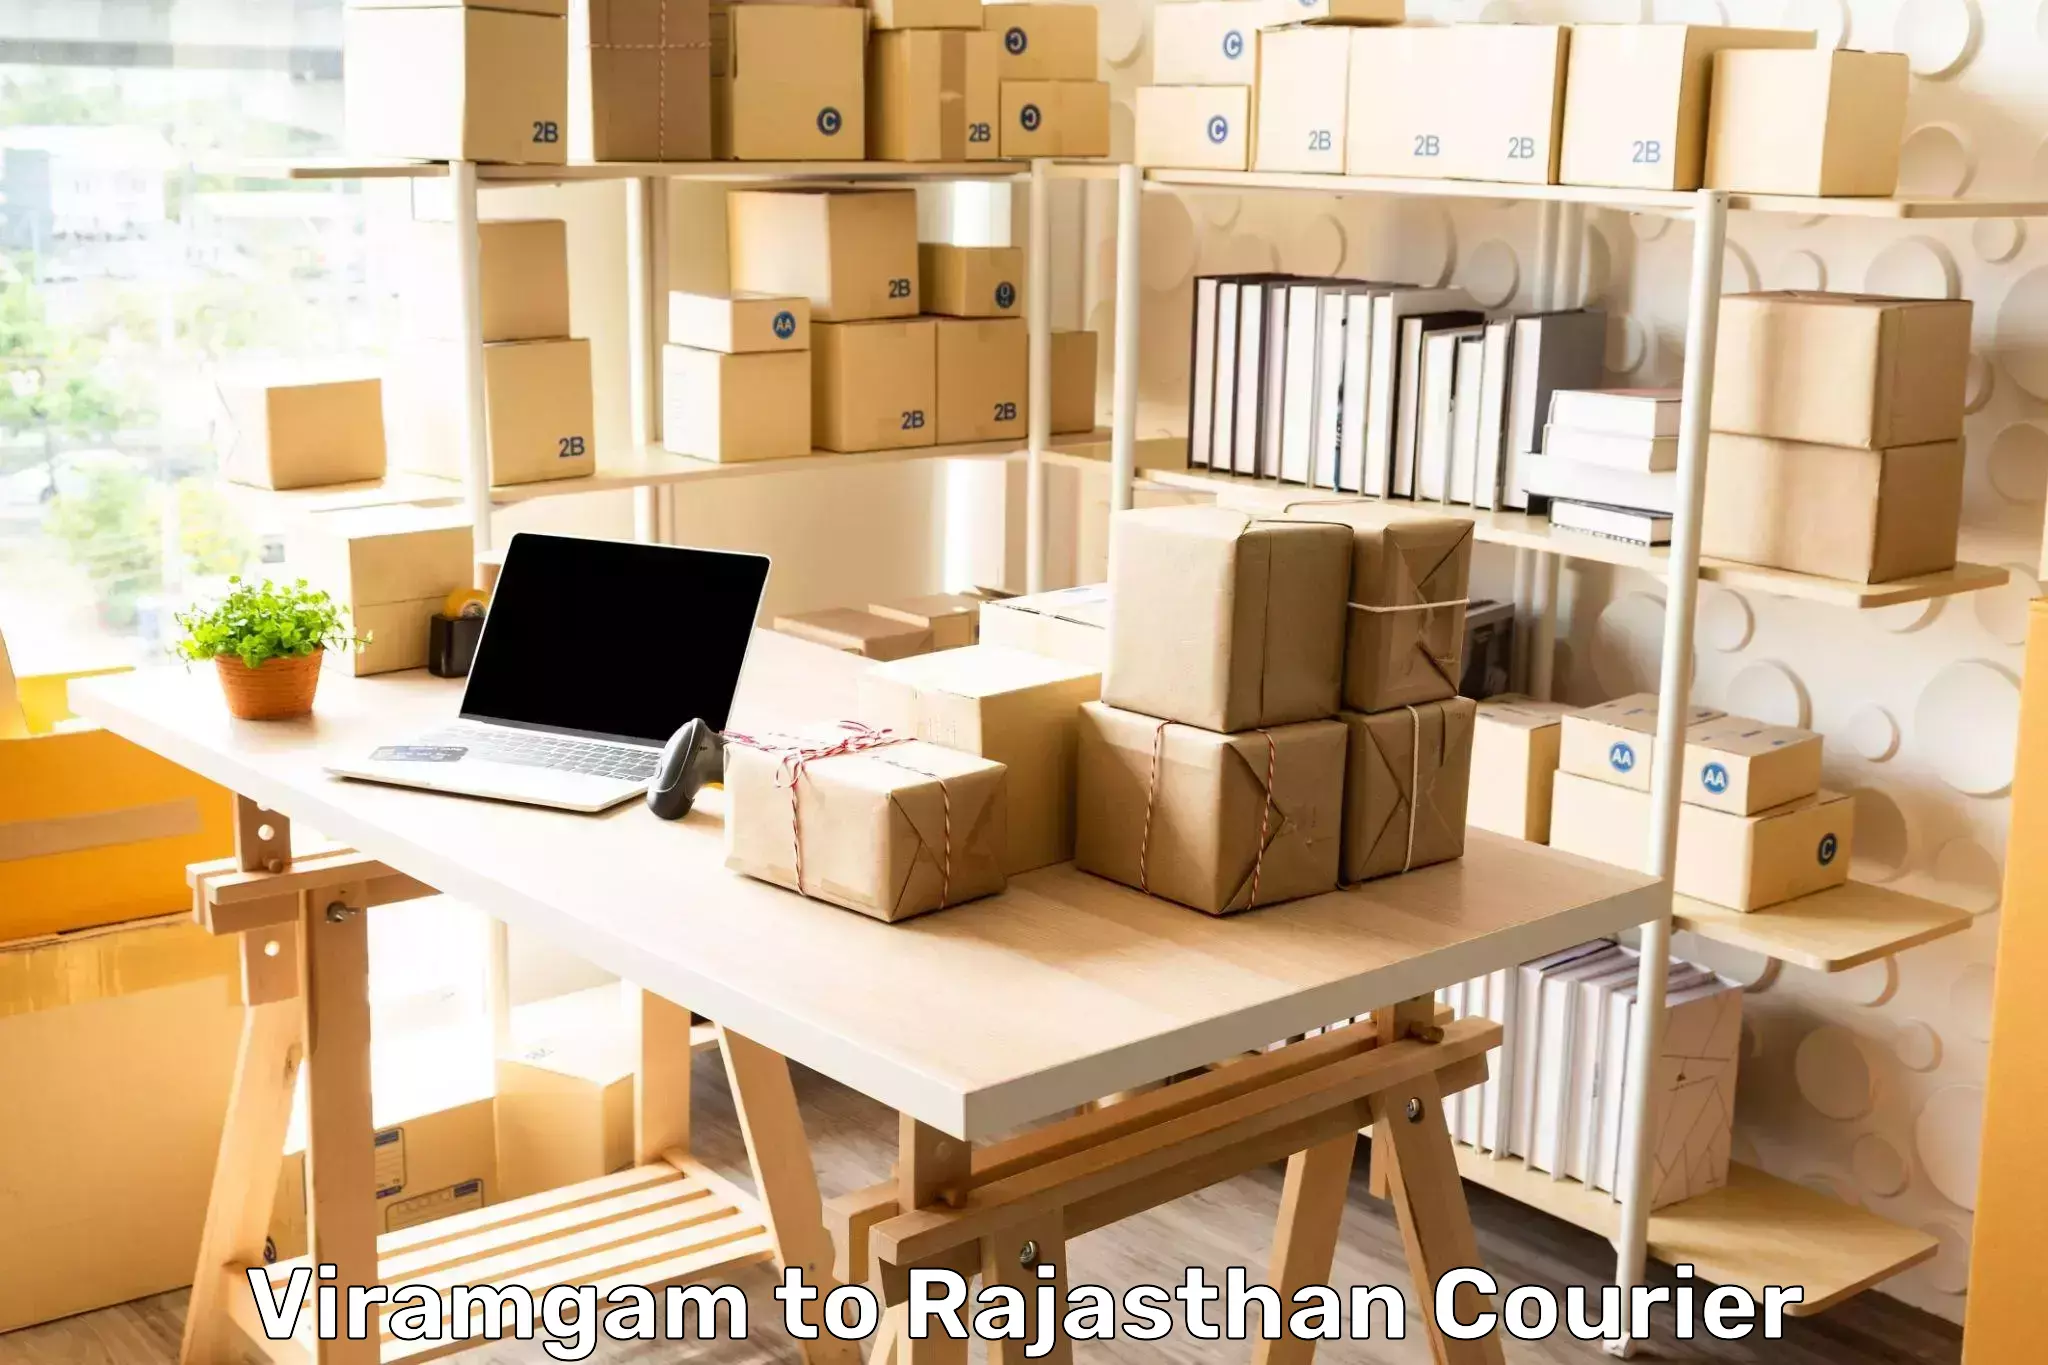 Package delivery network Viramgam to Rajasthan